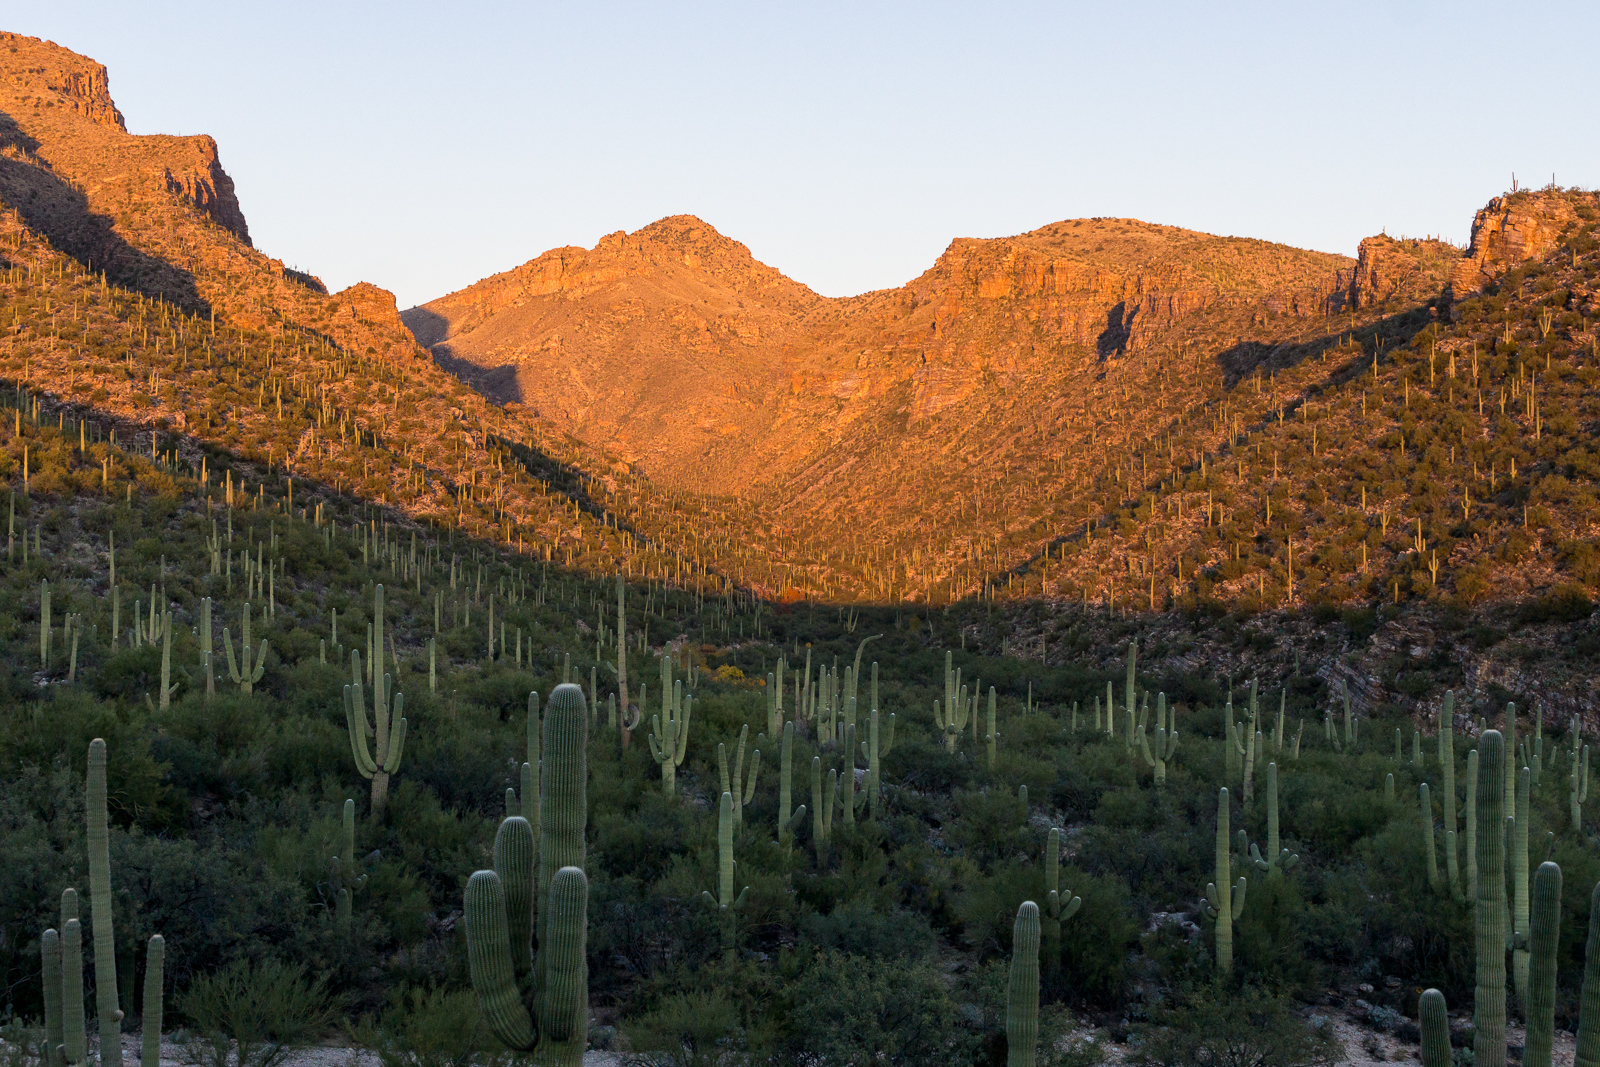 Bear Canyon - Sunset light and clear blue winter sky - a sea of Saguaros - from the road. November 2015.